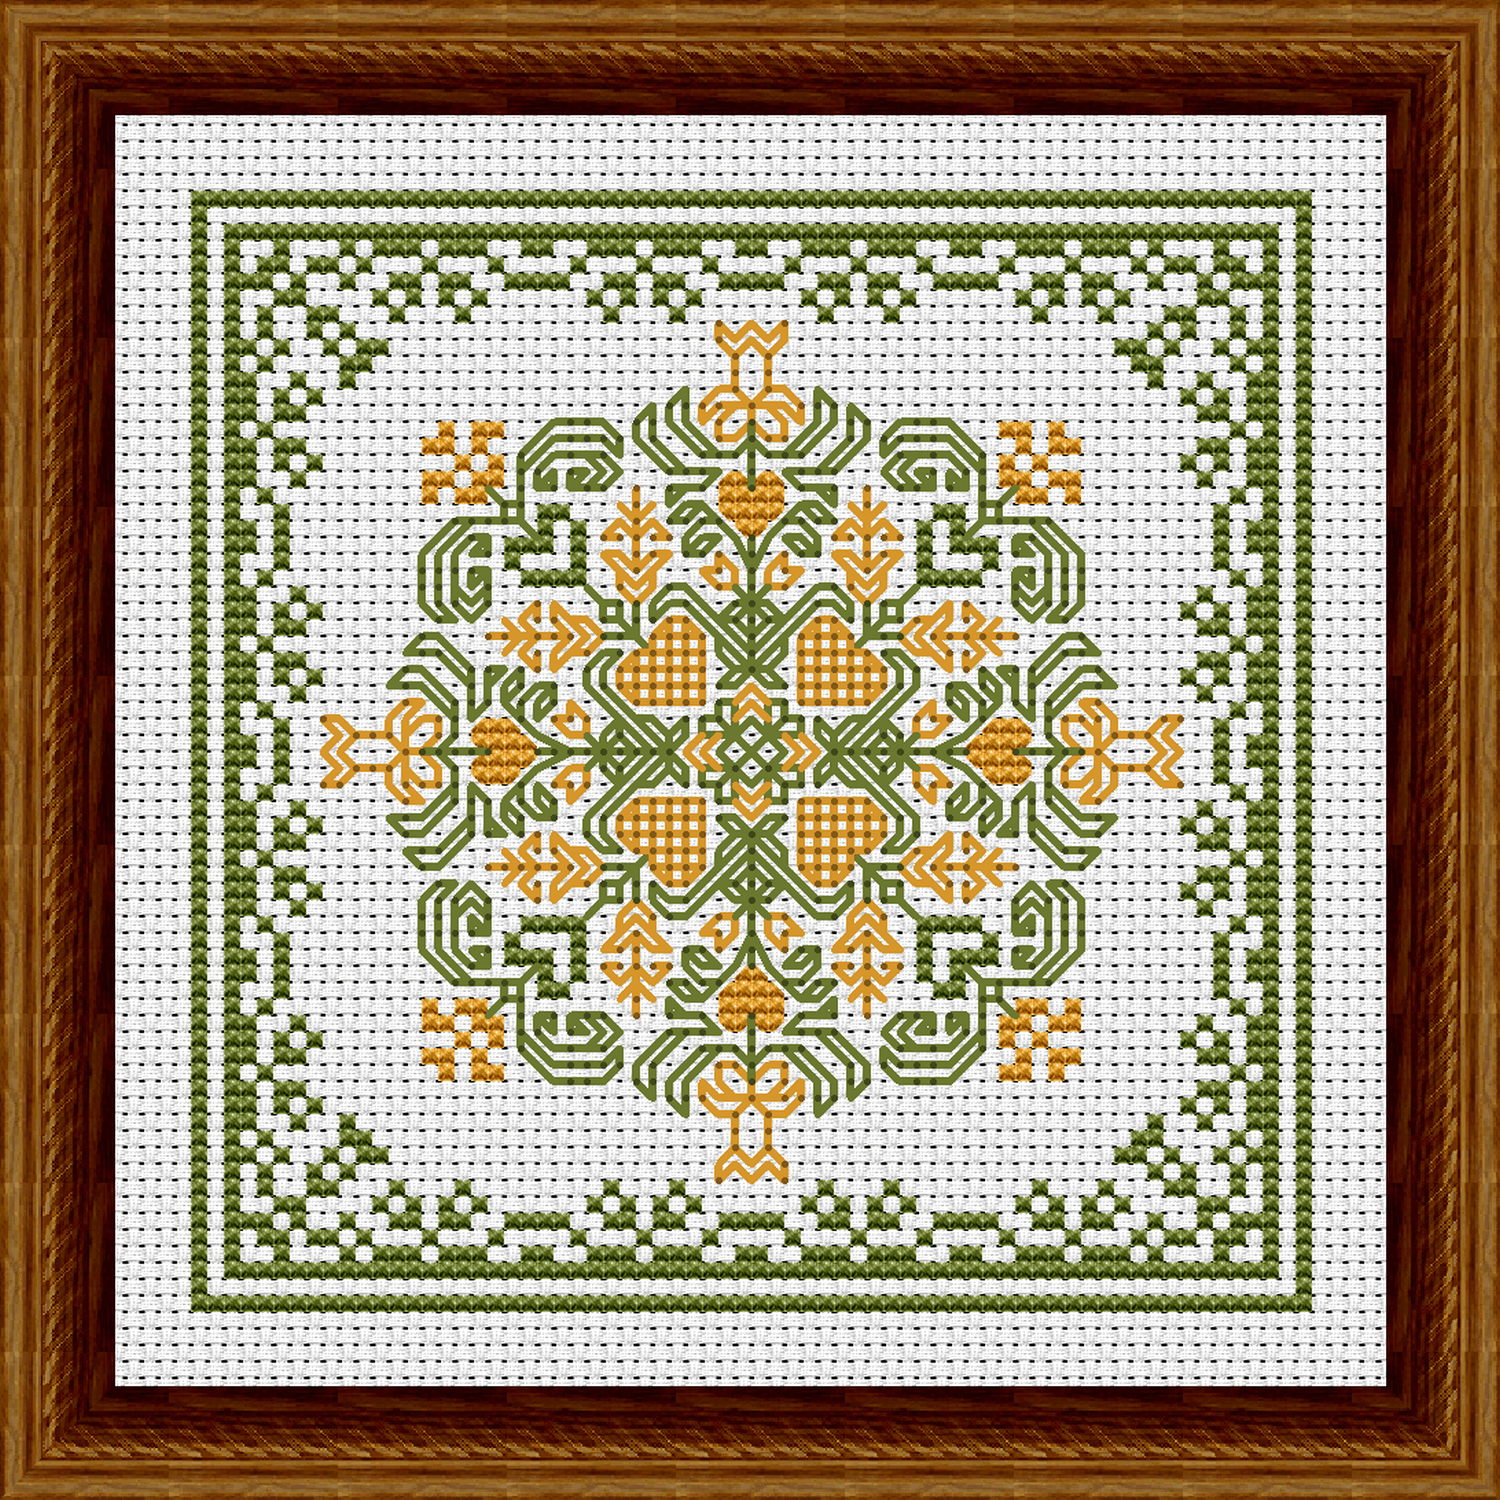 February Hearts Square with Daffodils Cross Stitch Pattern 3501